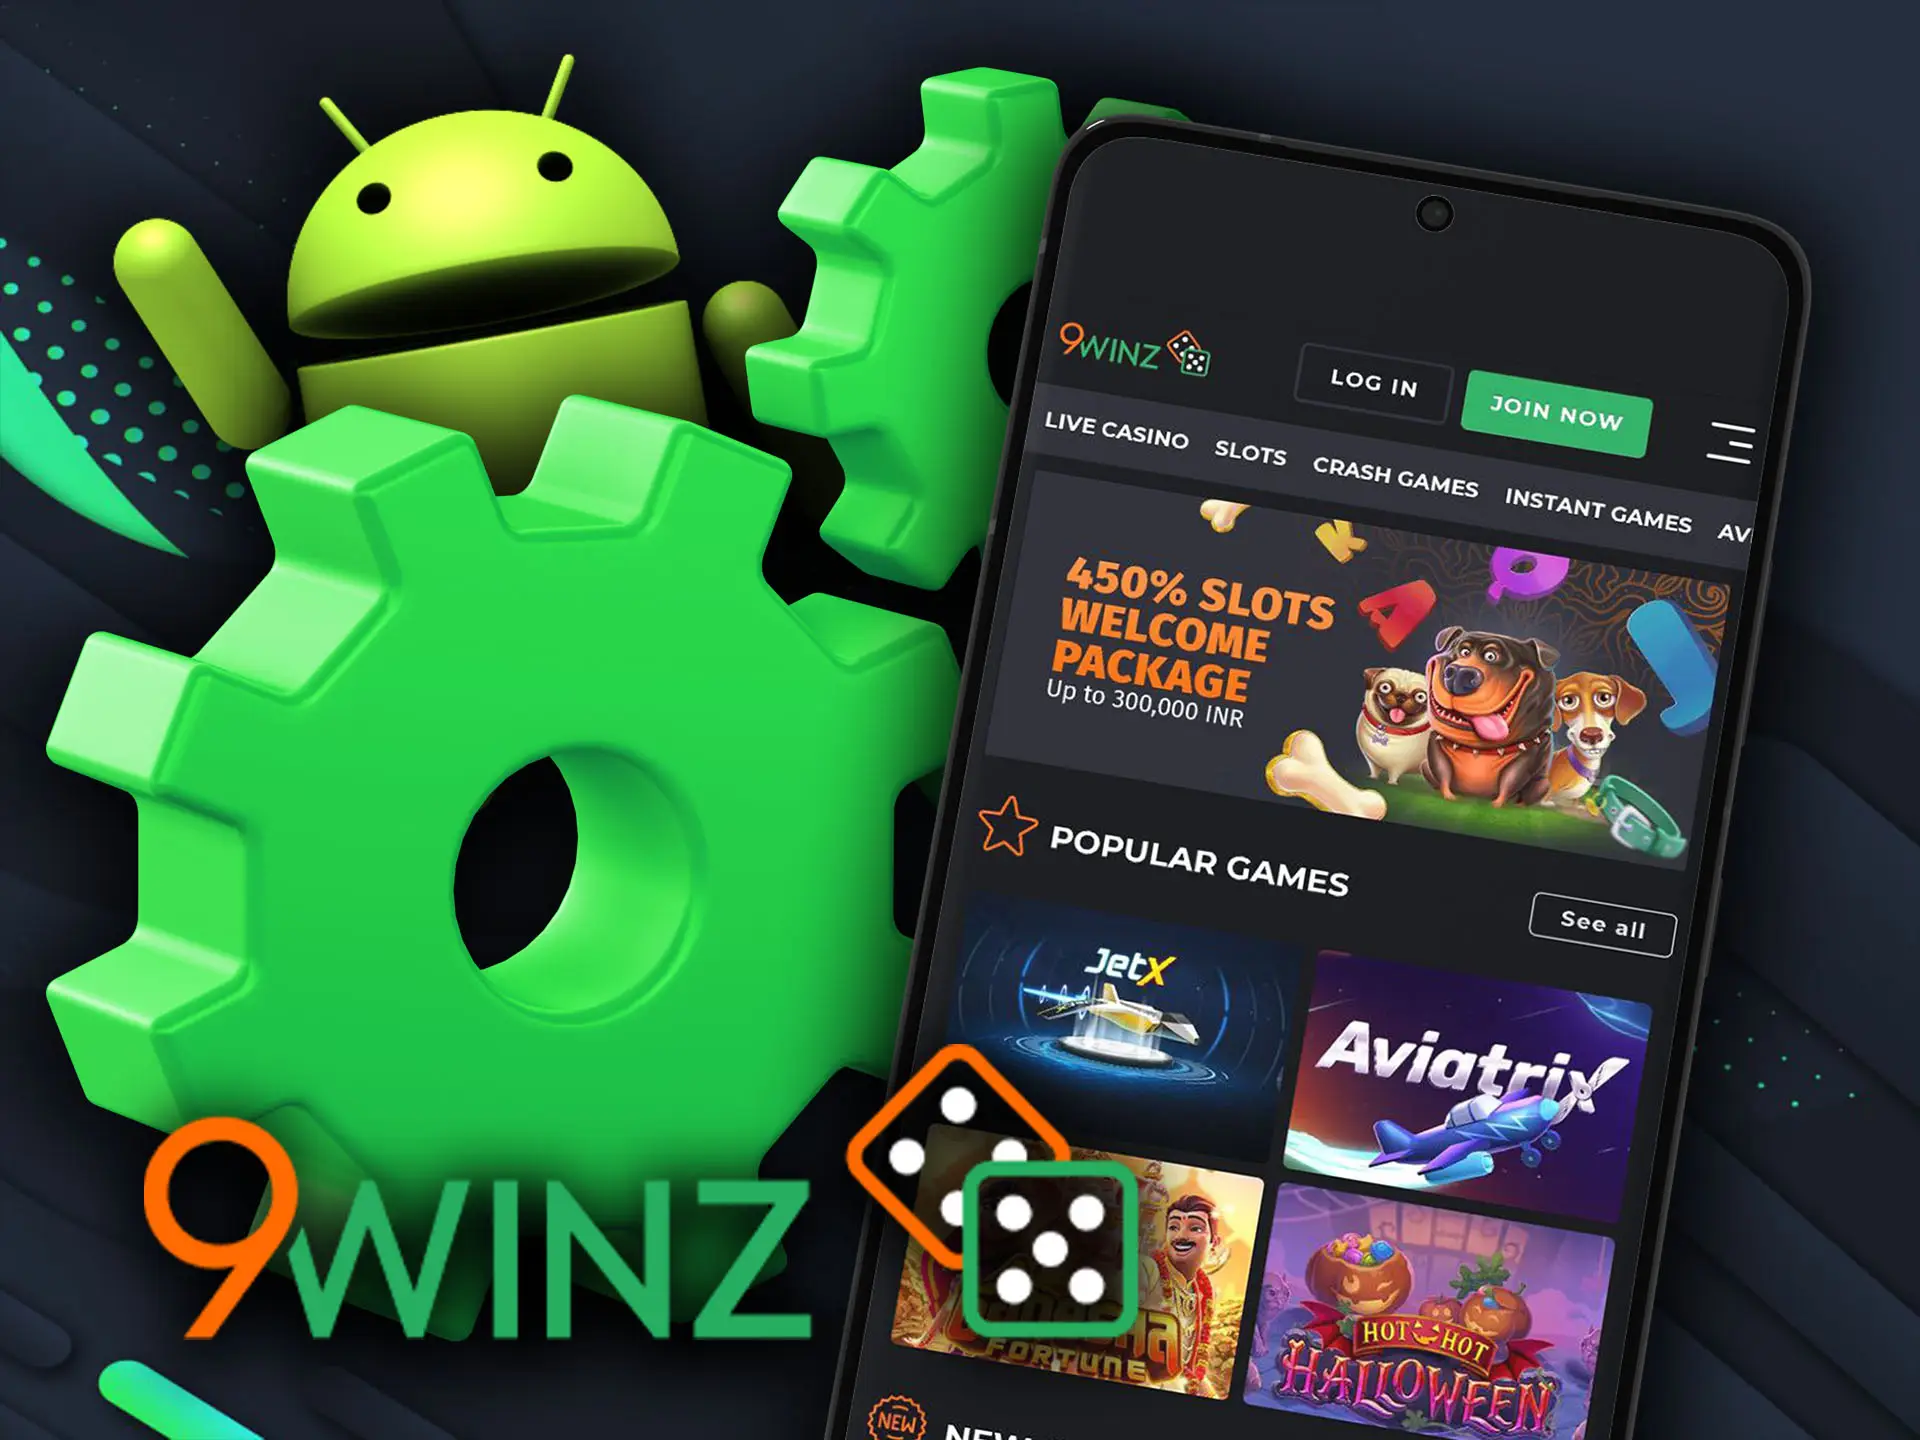 9winz app android has low system requirements and easy to download and use.